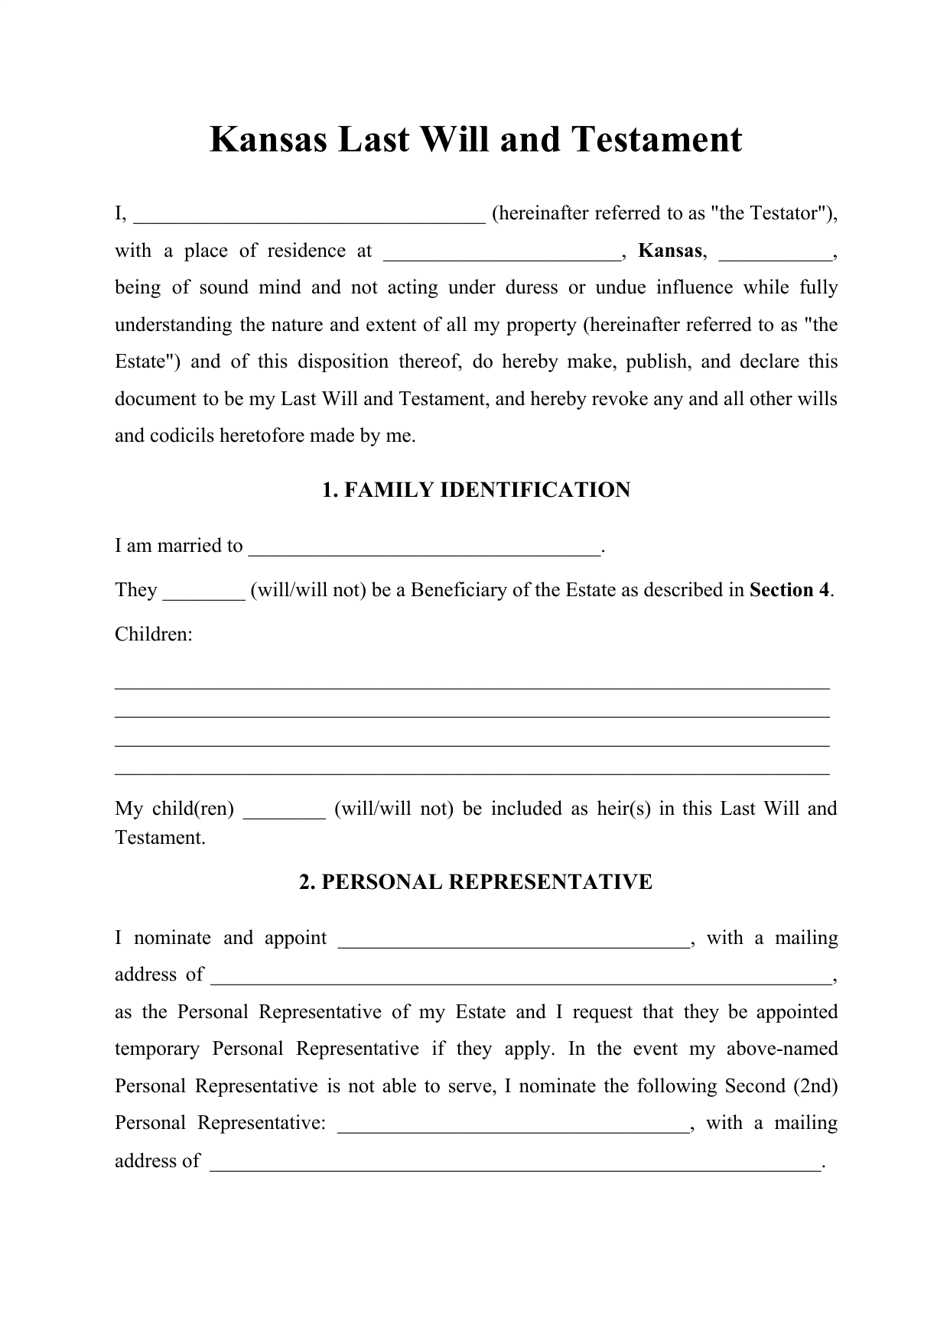 Kansas Last Will and Testament Template Download Printable PDF